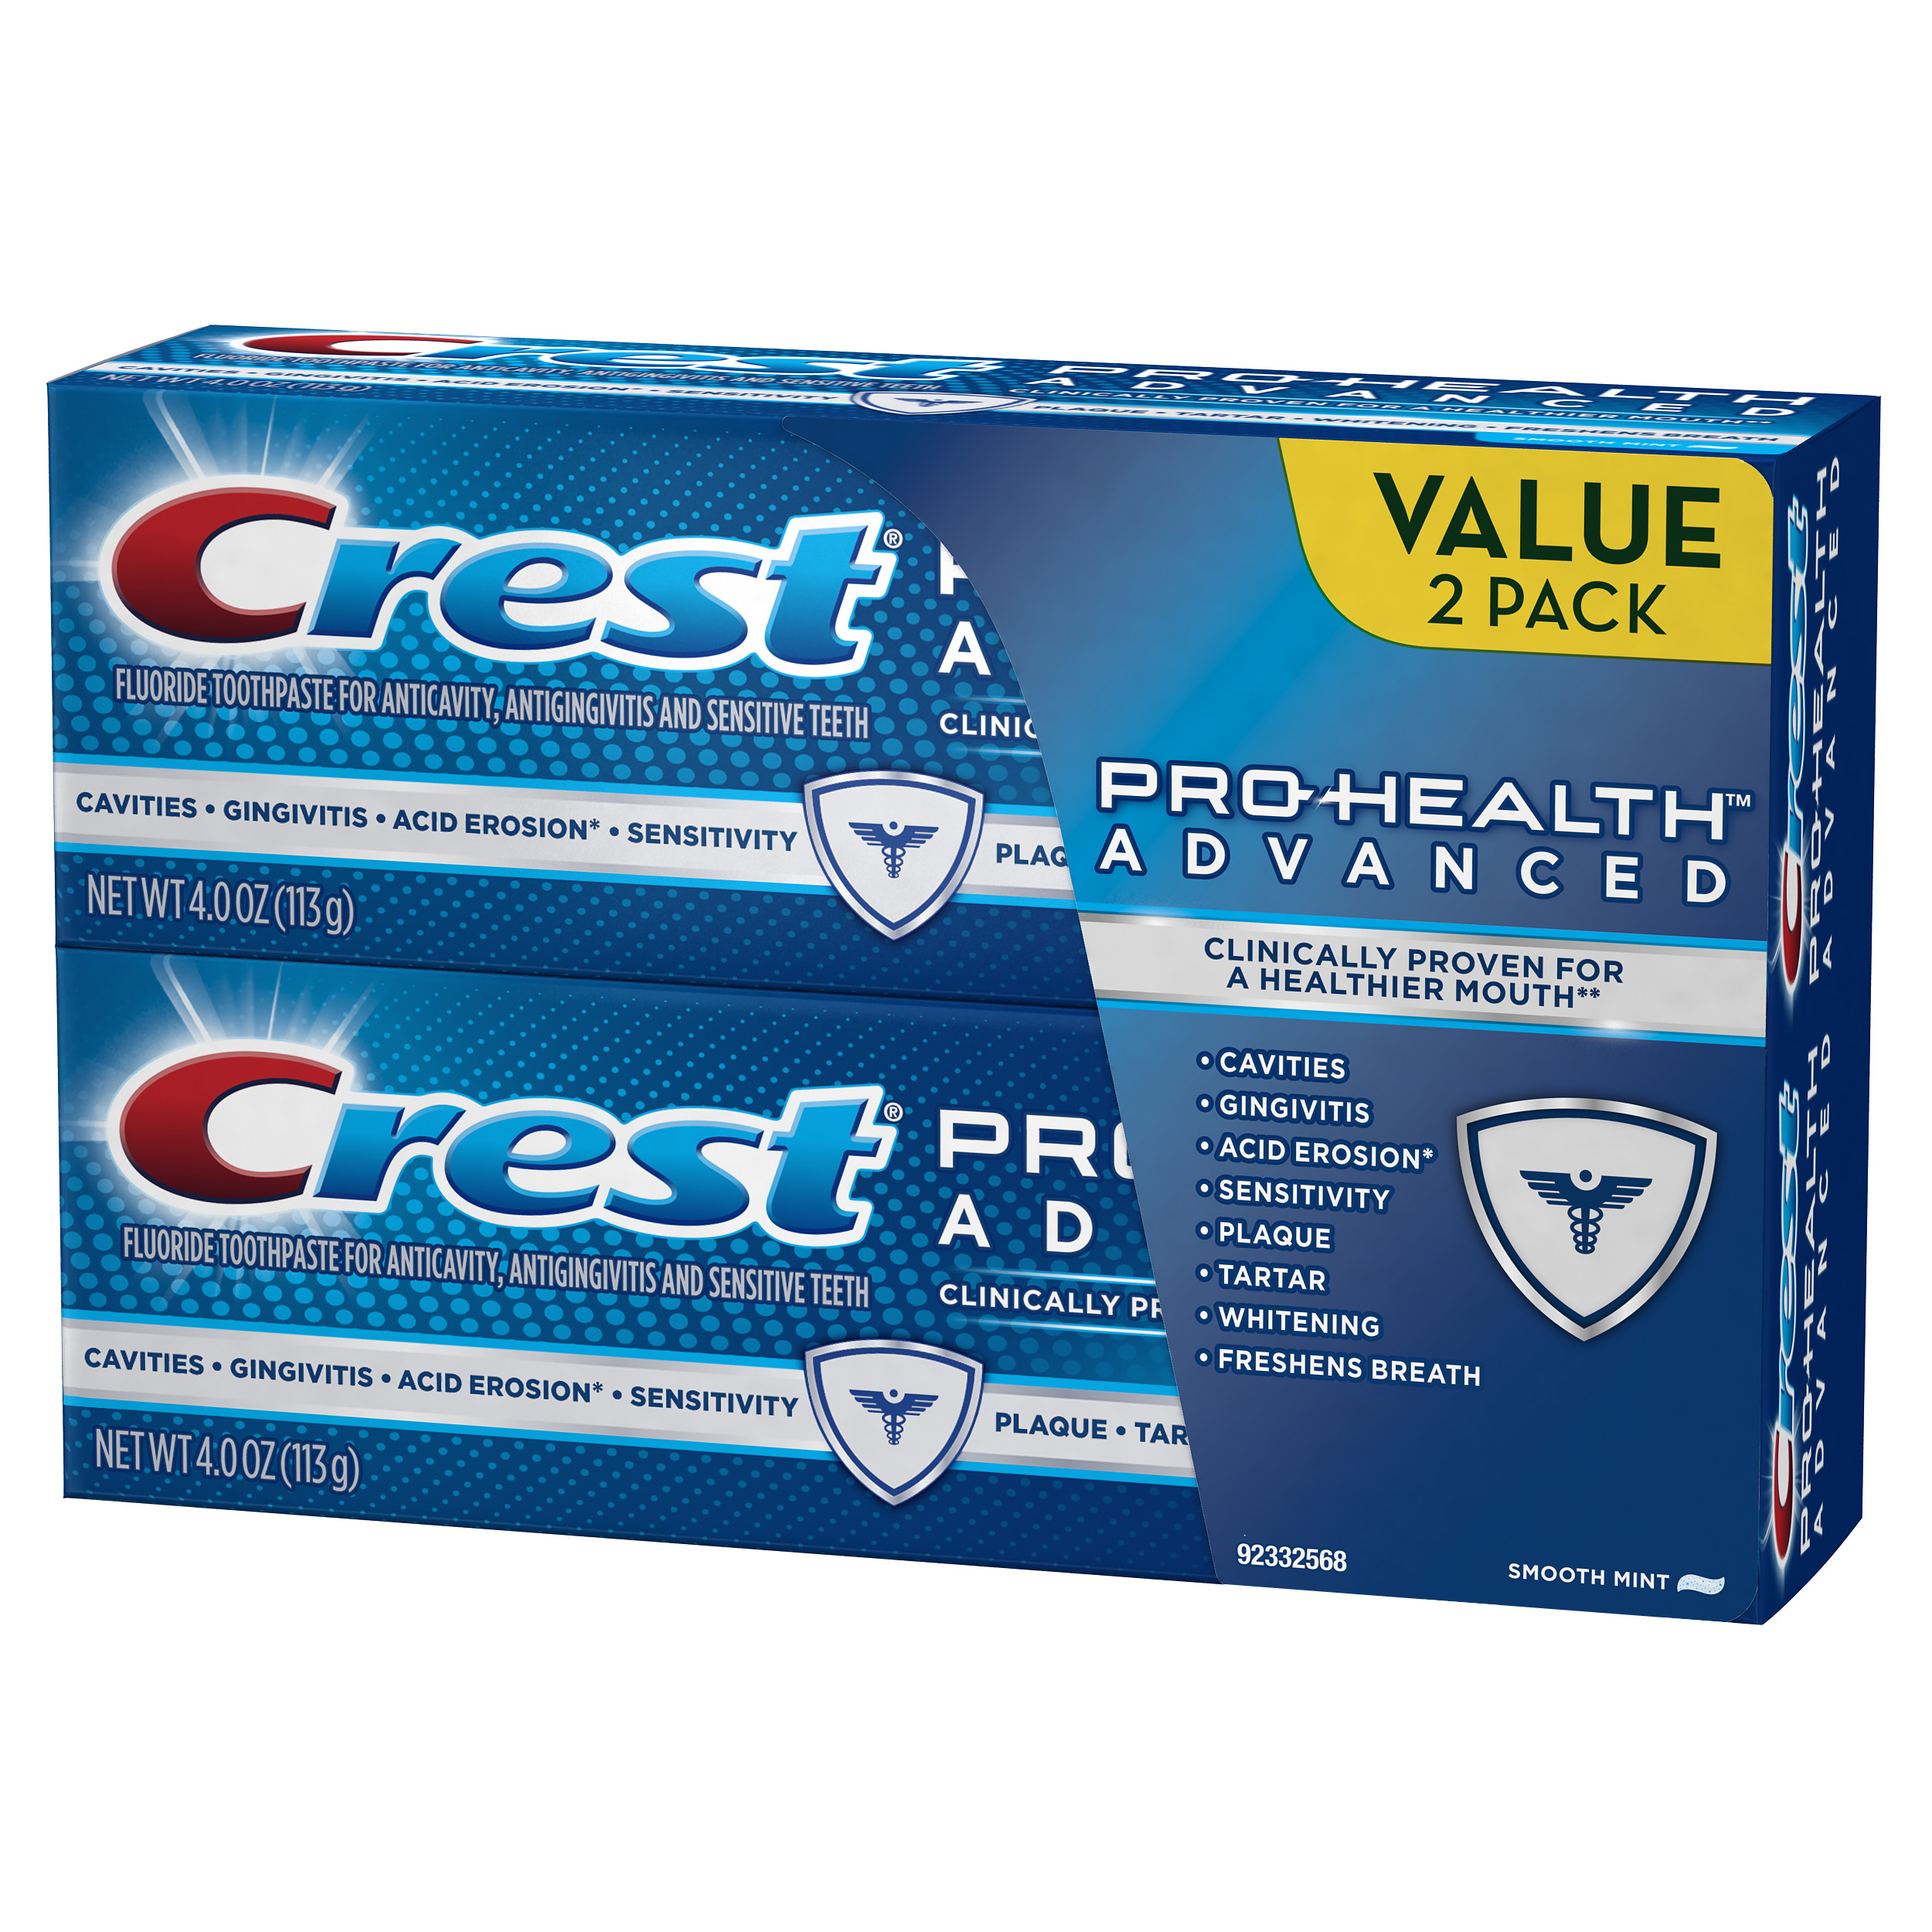 Crest Pro-Health Advanced Soothing Smooth Mint Toothpaste 8.0 oz. 2 Count - image 2 of 9